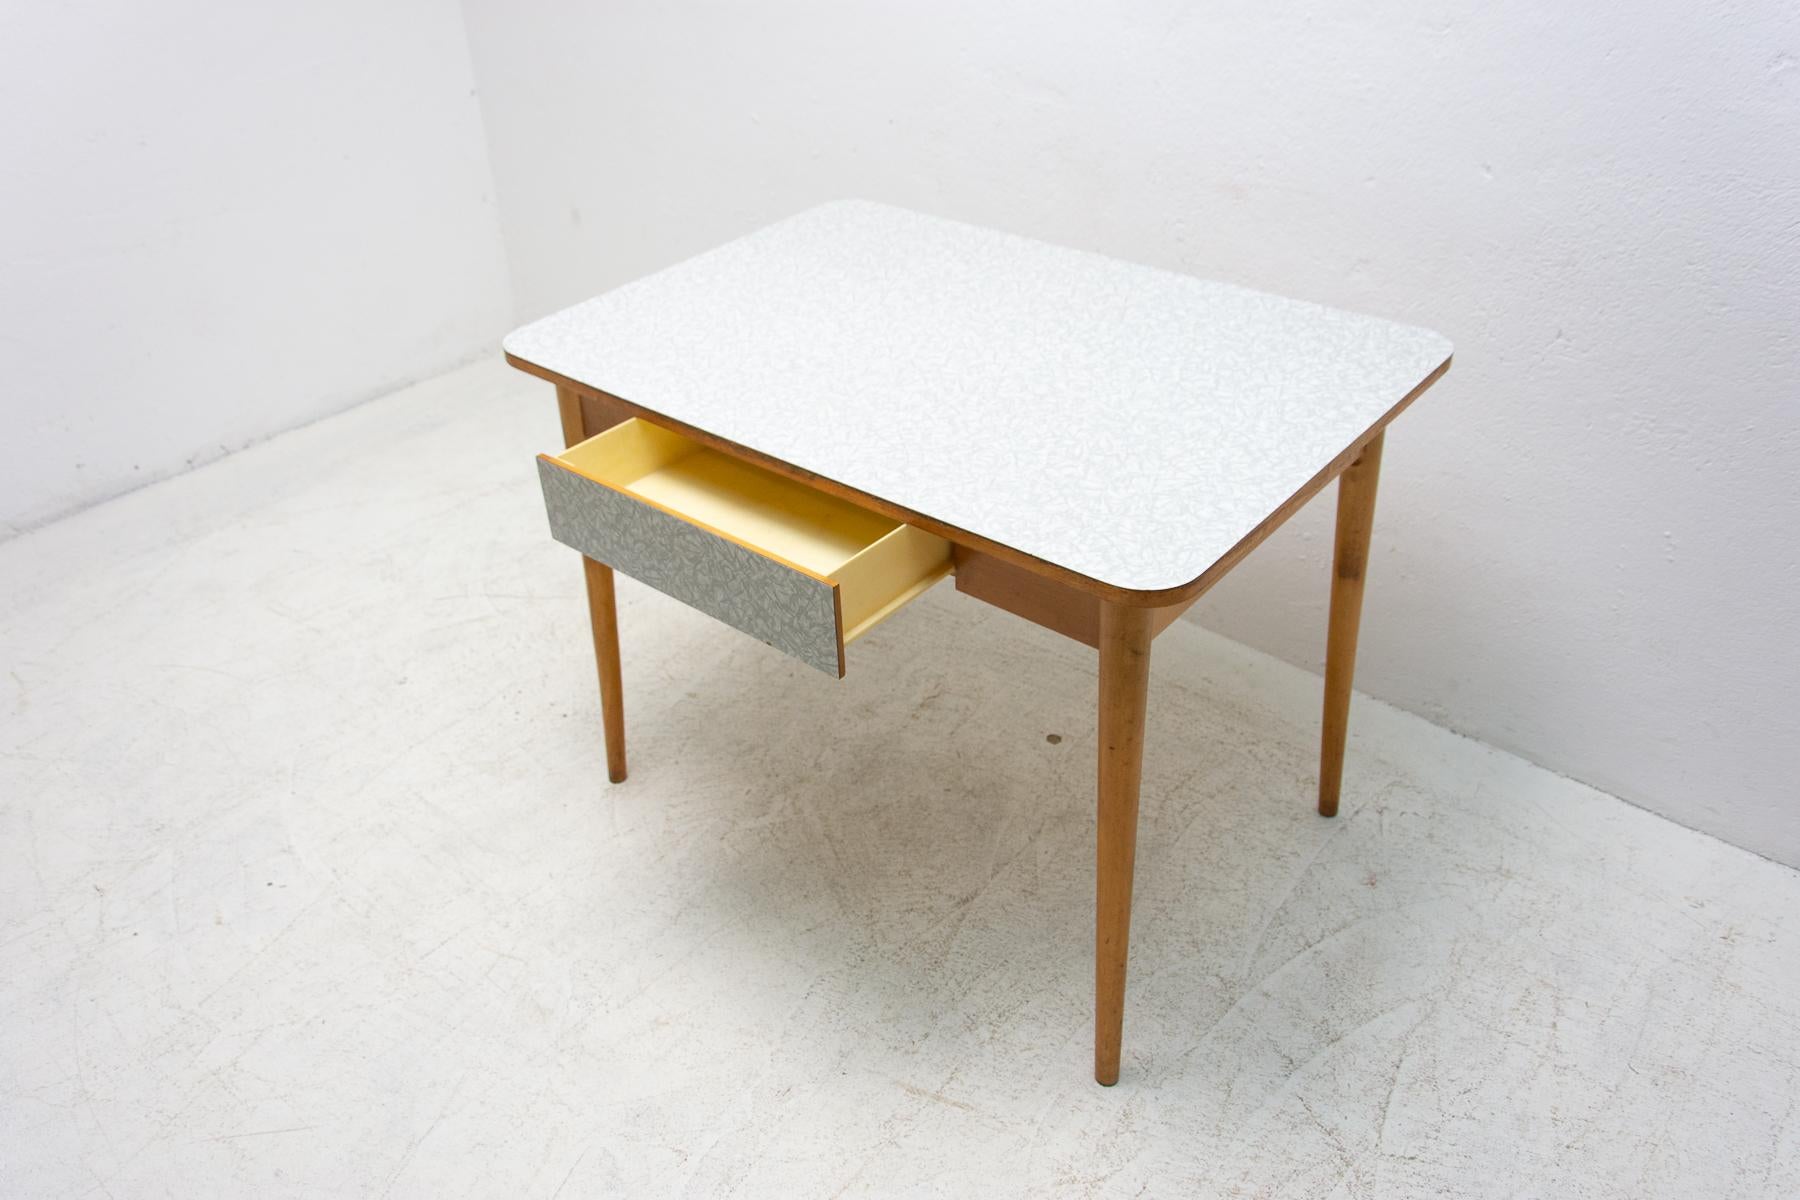  Midcentury Formica and Wood Central Table, Czechoslovakia, 1960's For Sale 1